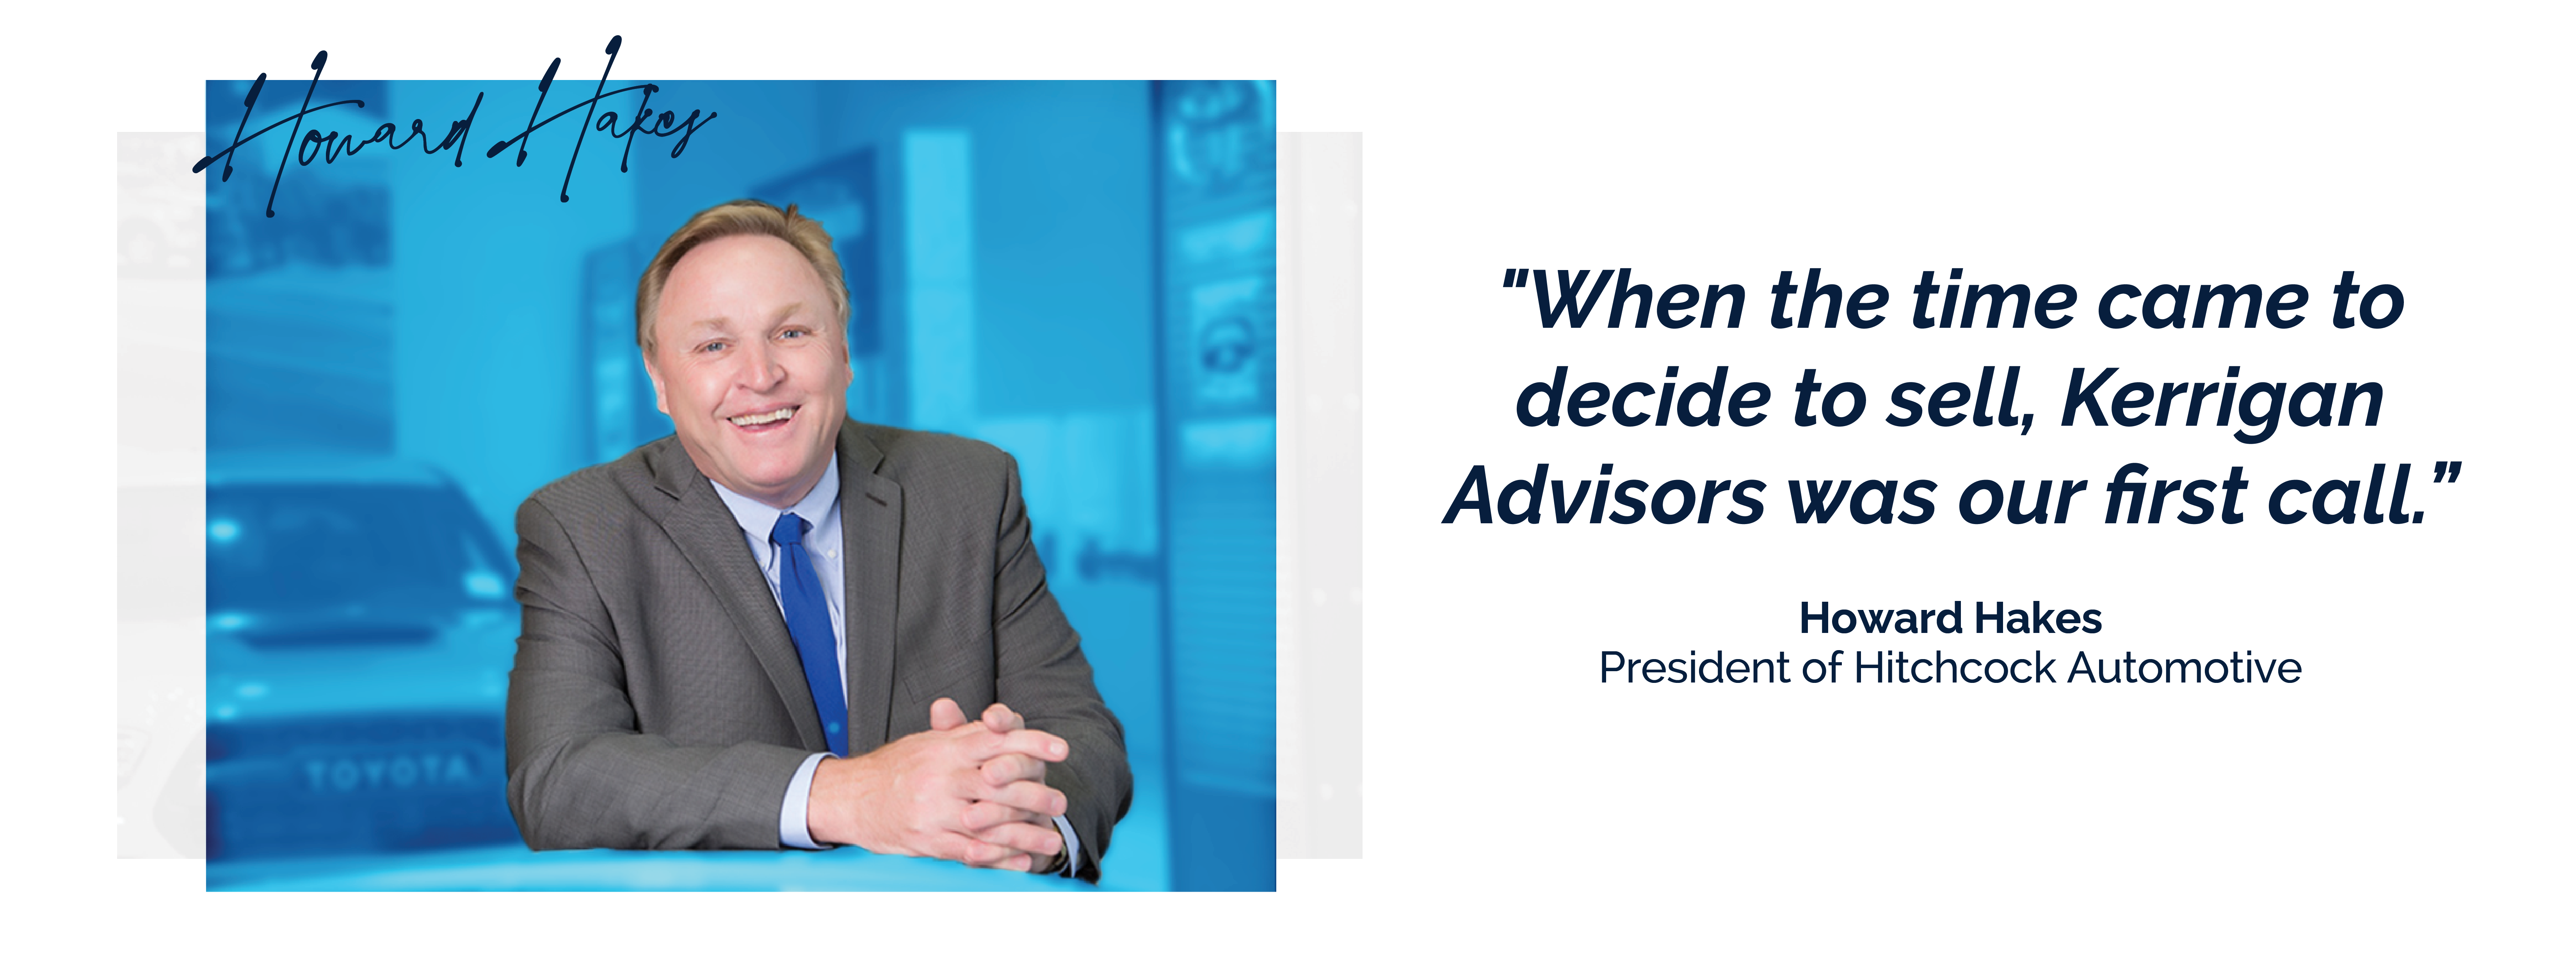 When the time came to decide to sell, Kerrigan Advisors was our first call. - Howard Hakes